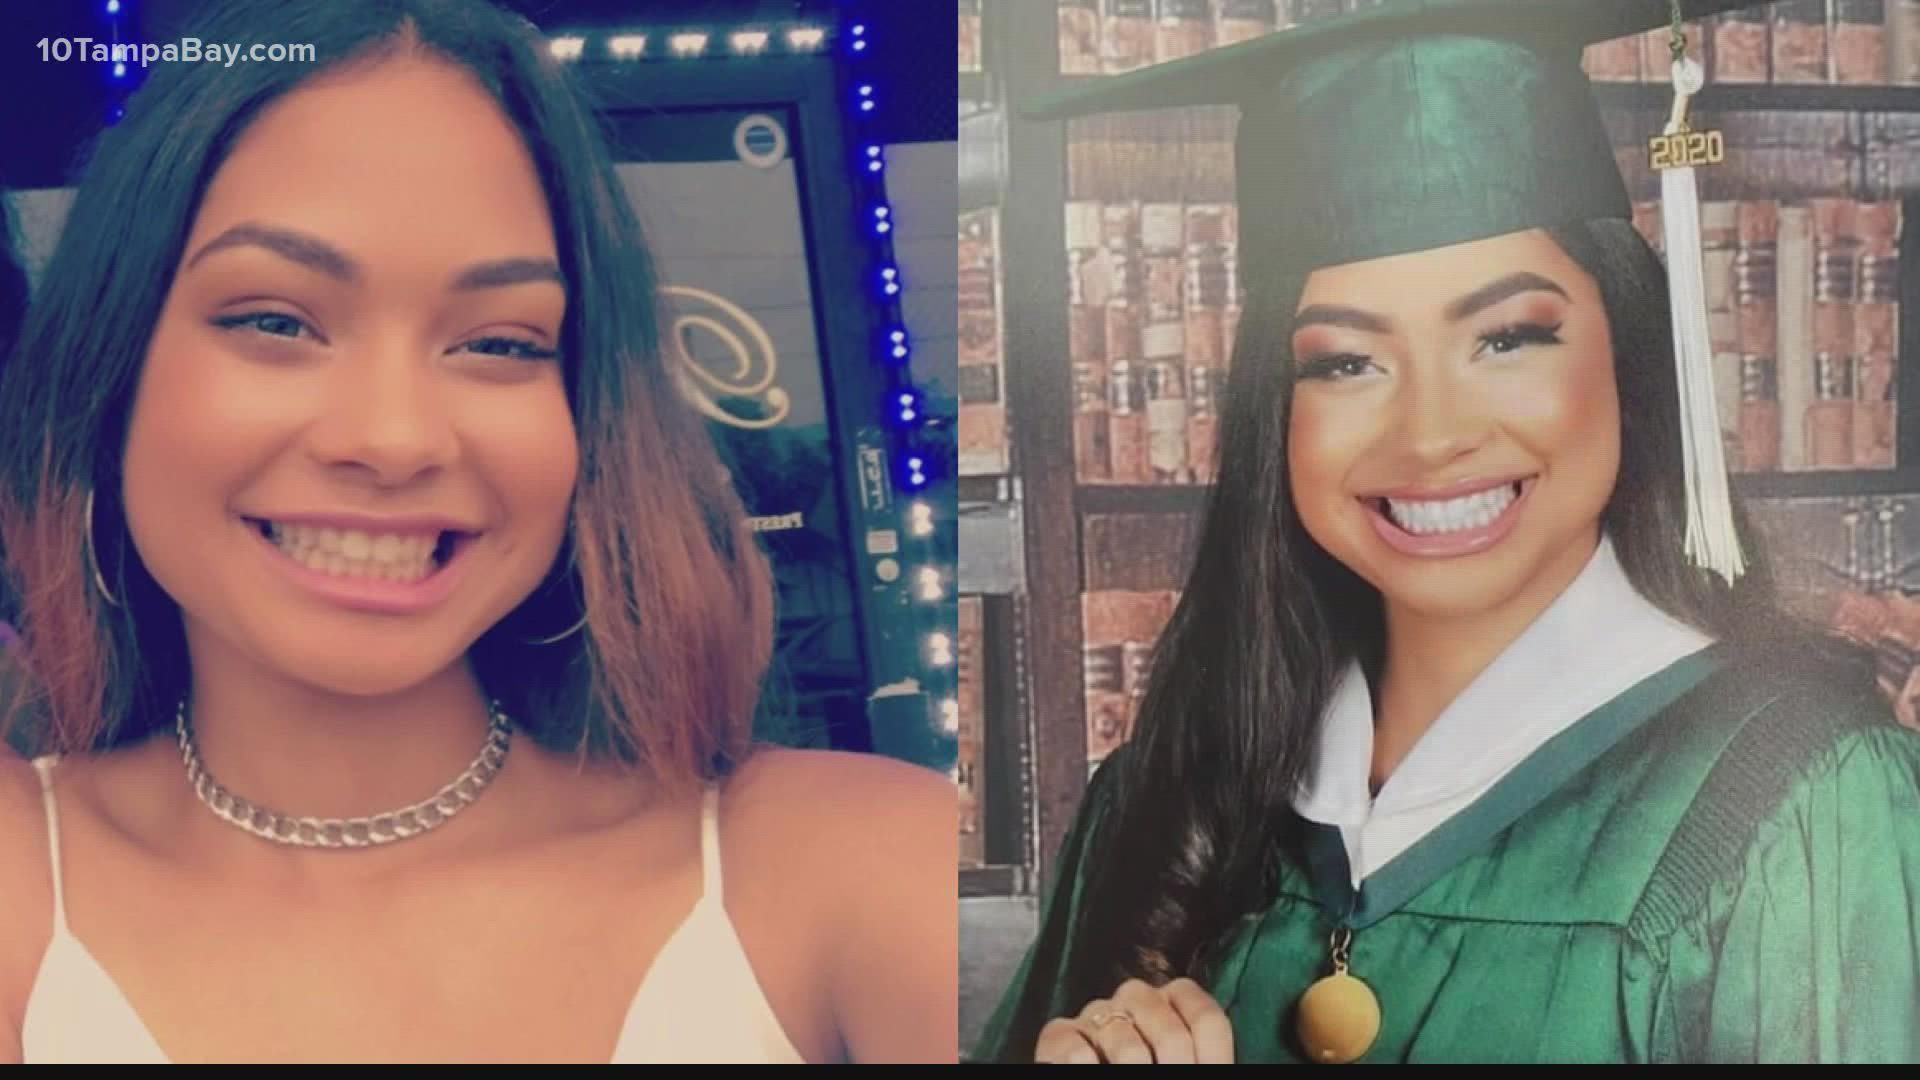 An attorney representing the family of Miya Marcano says her loved ones are now planning a funeral for the 19-year-old, whose body was found this weekend.